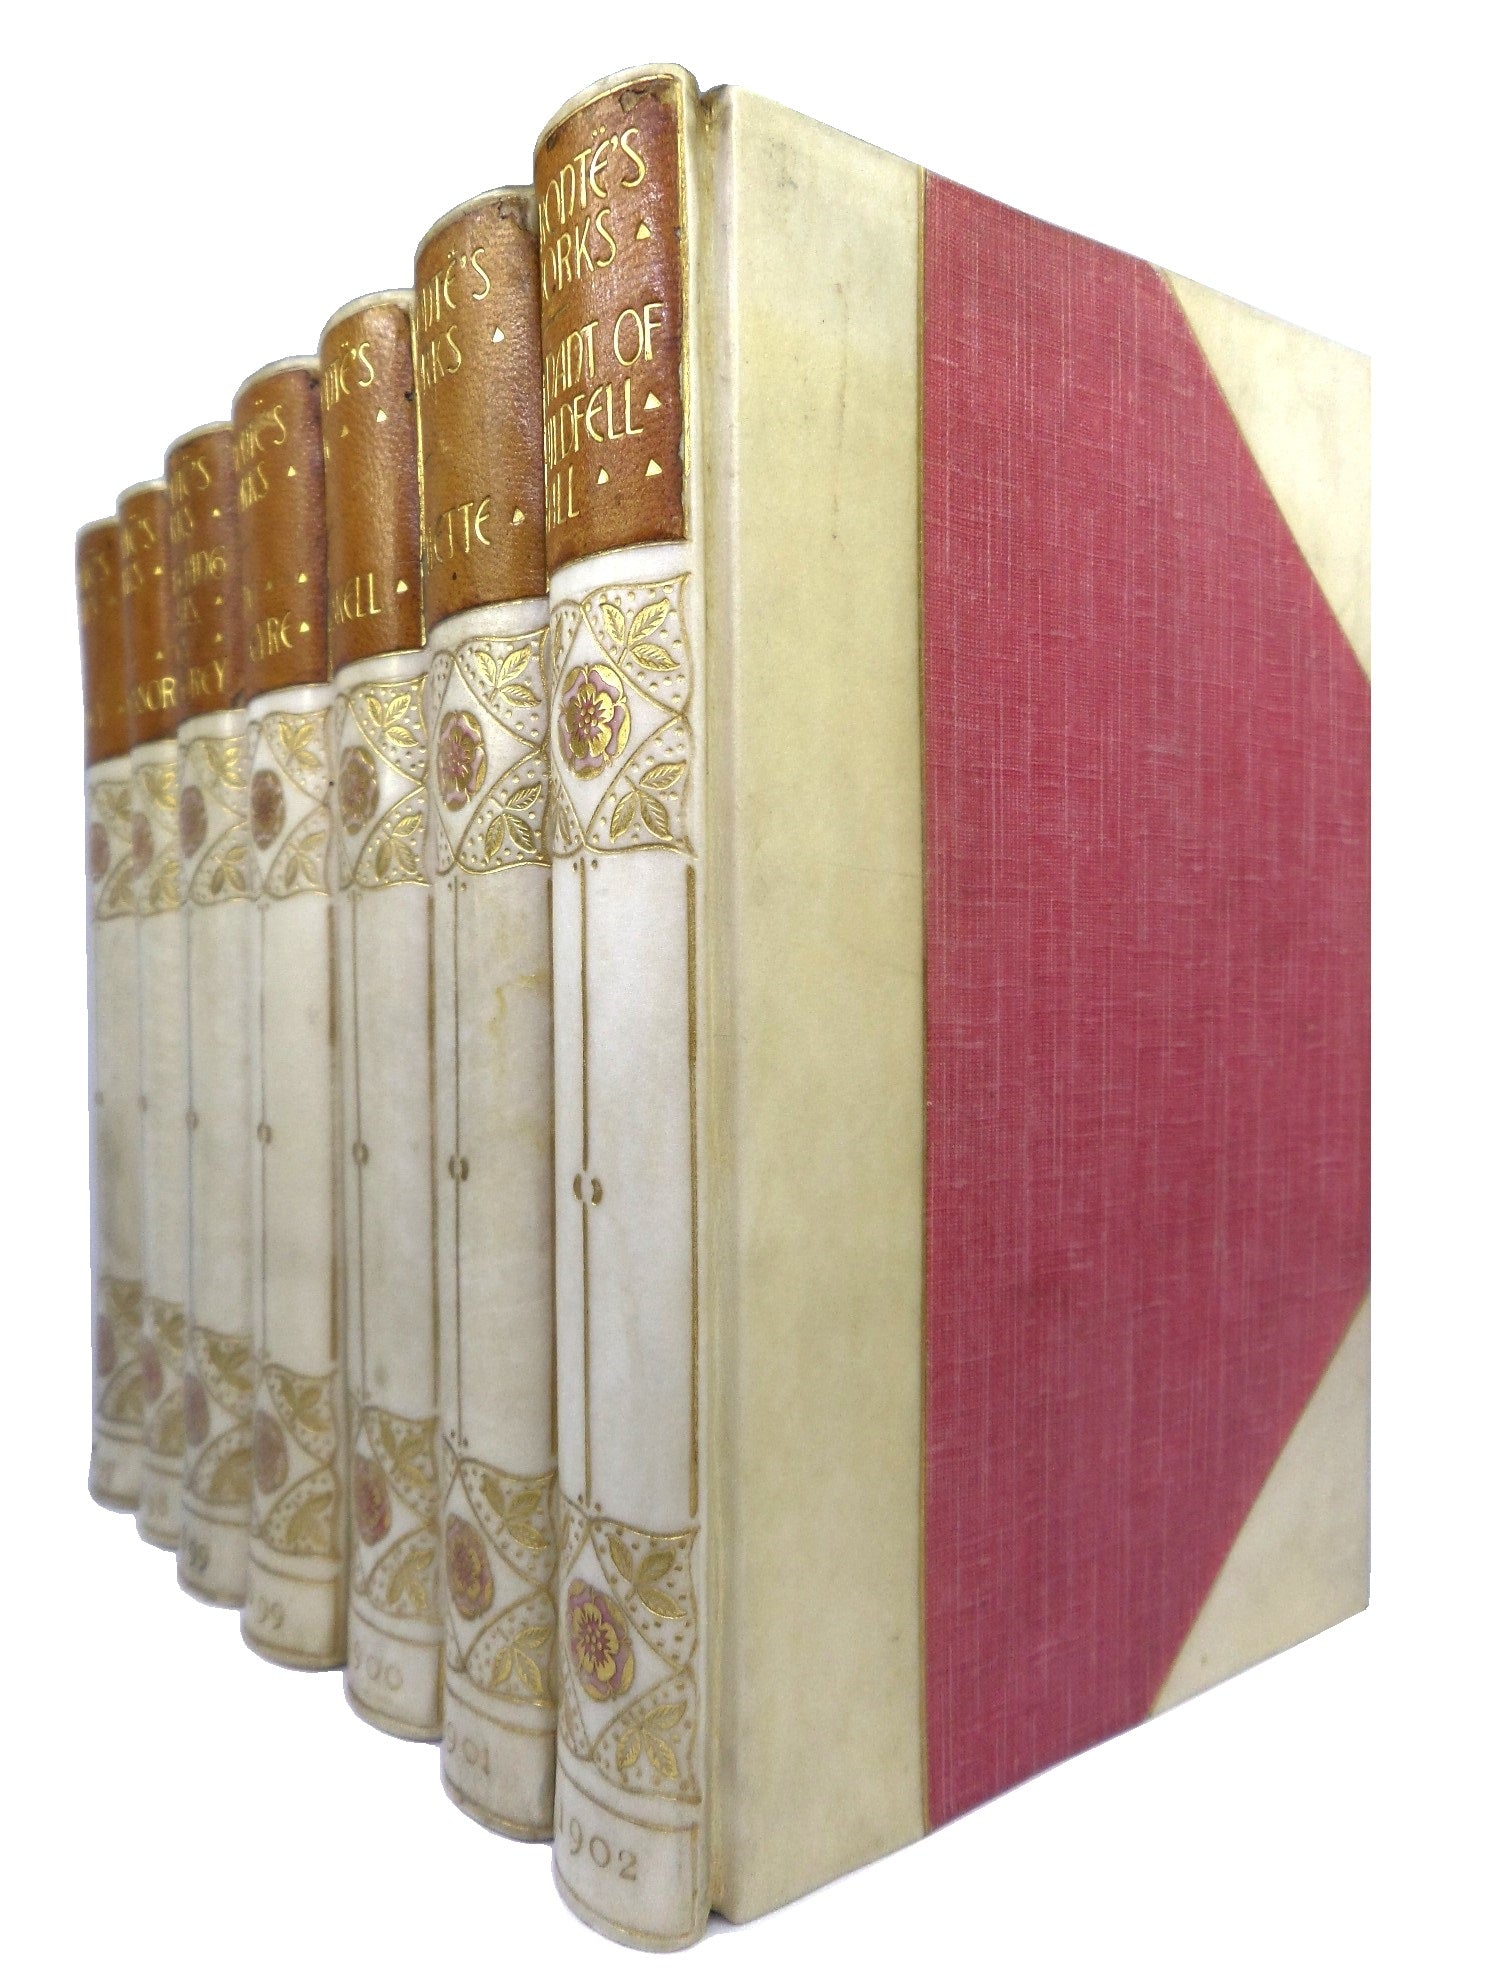 LIFE & WORKS OF CHARLOTTE BRONTE & HER SISTERS FINELY BOUND IN SEVEN VOLUMES BY TRUSLOVE & HANSON